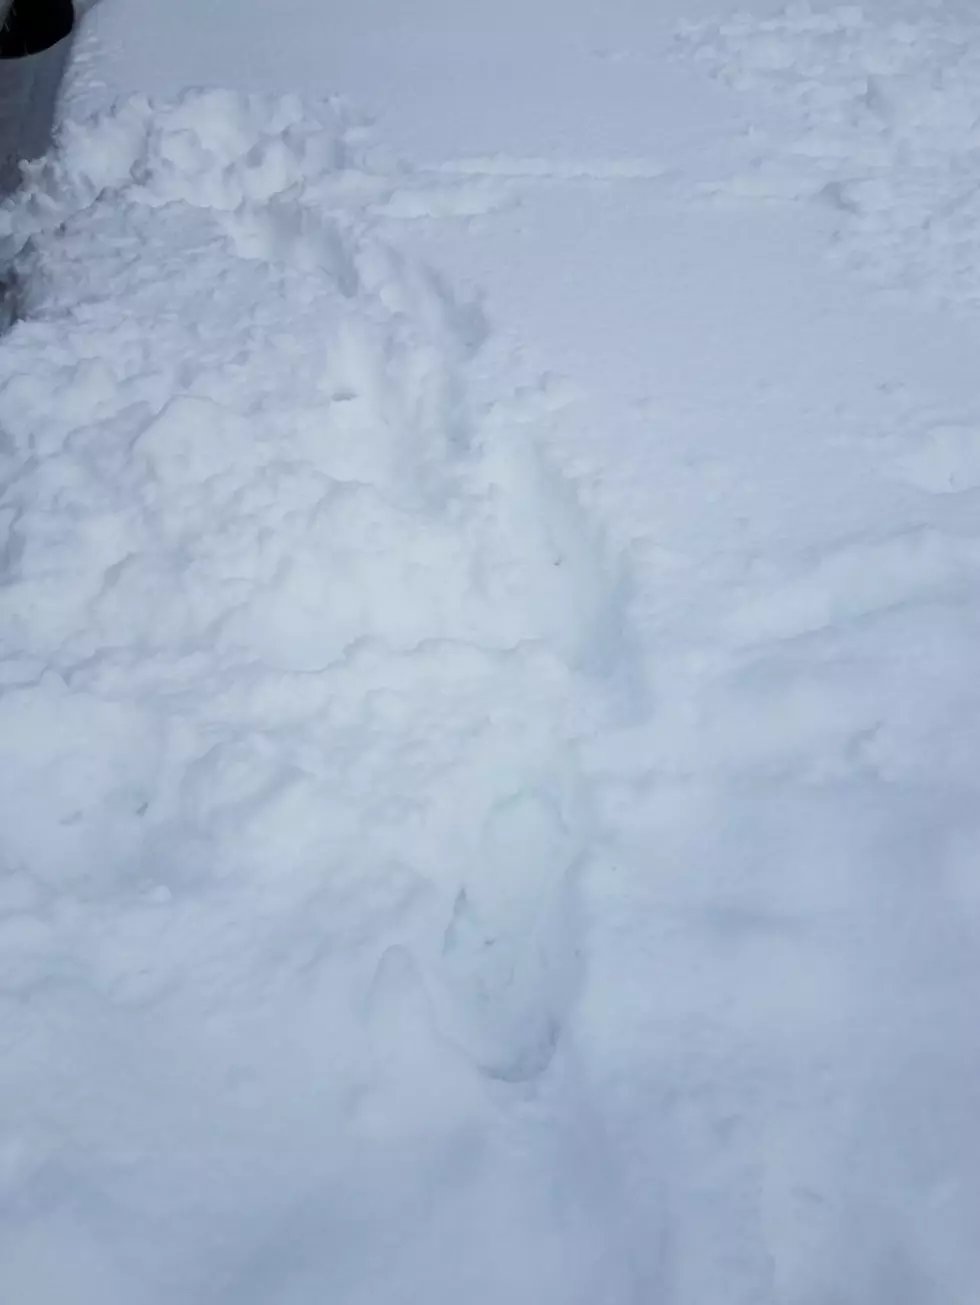 Accused Massachusetts Thief Foiled by Footprints